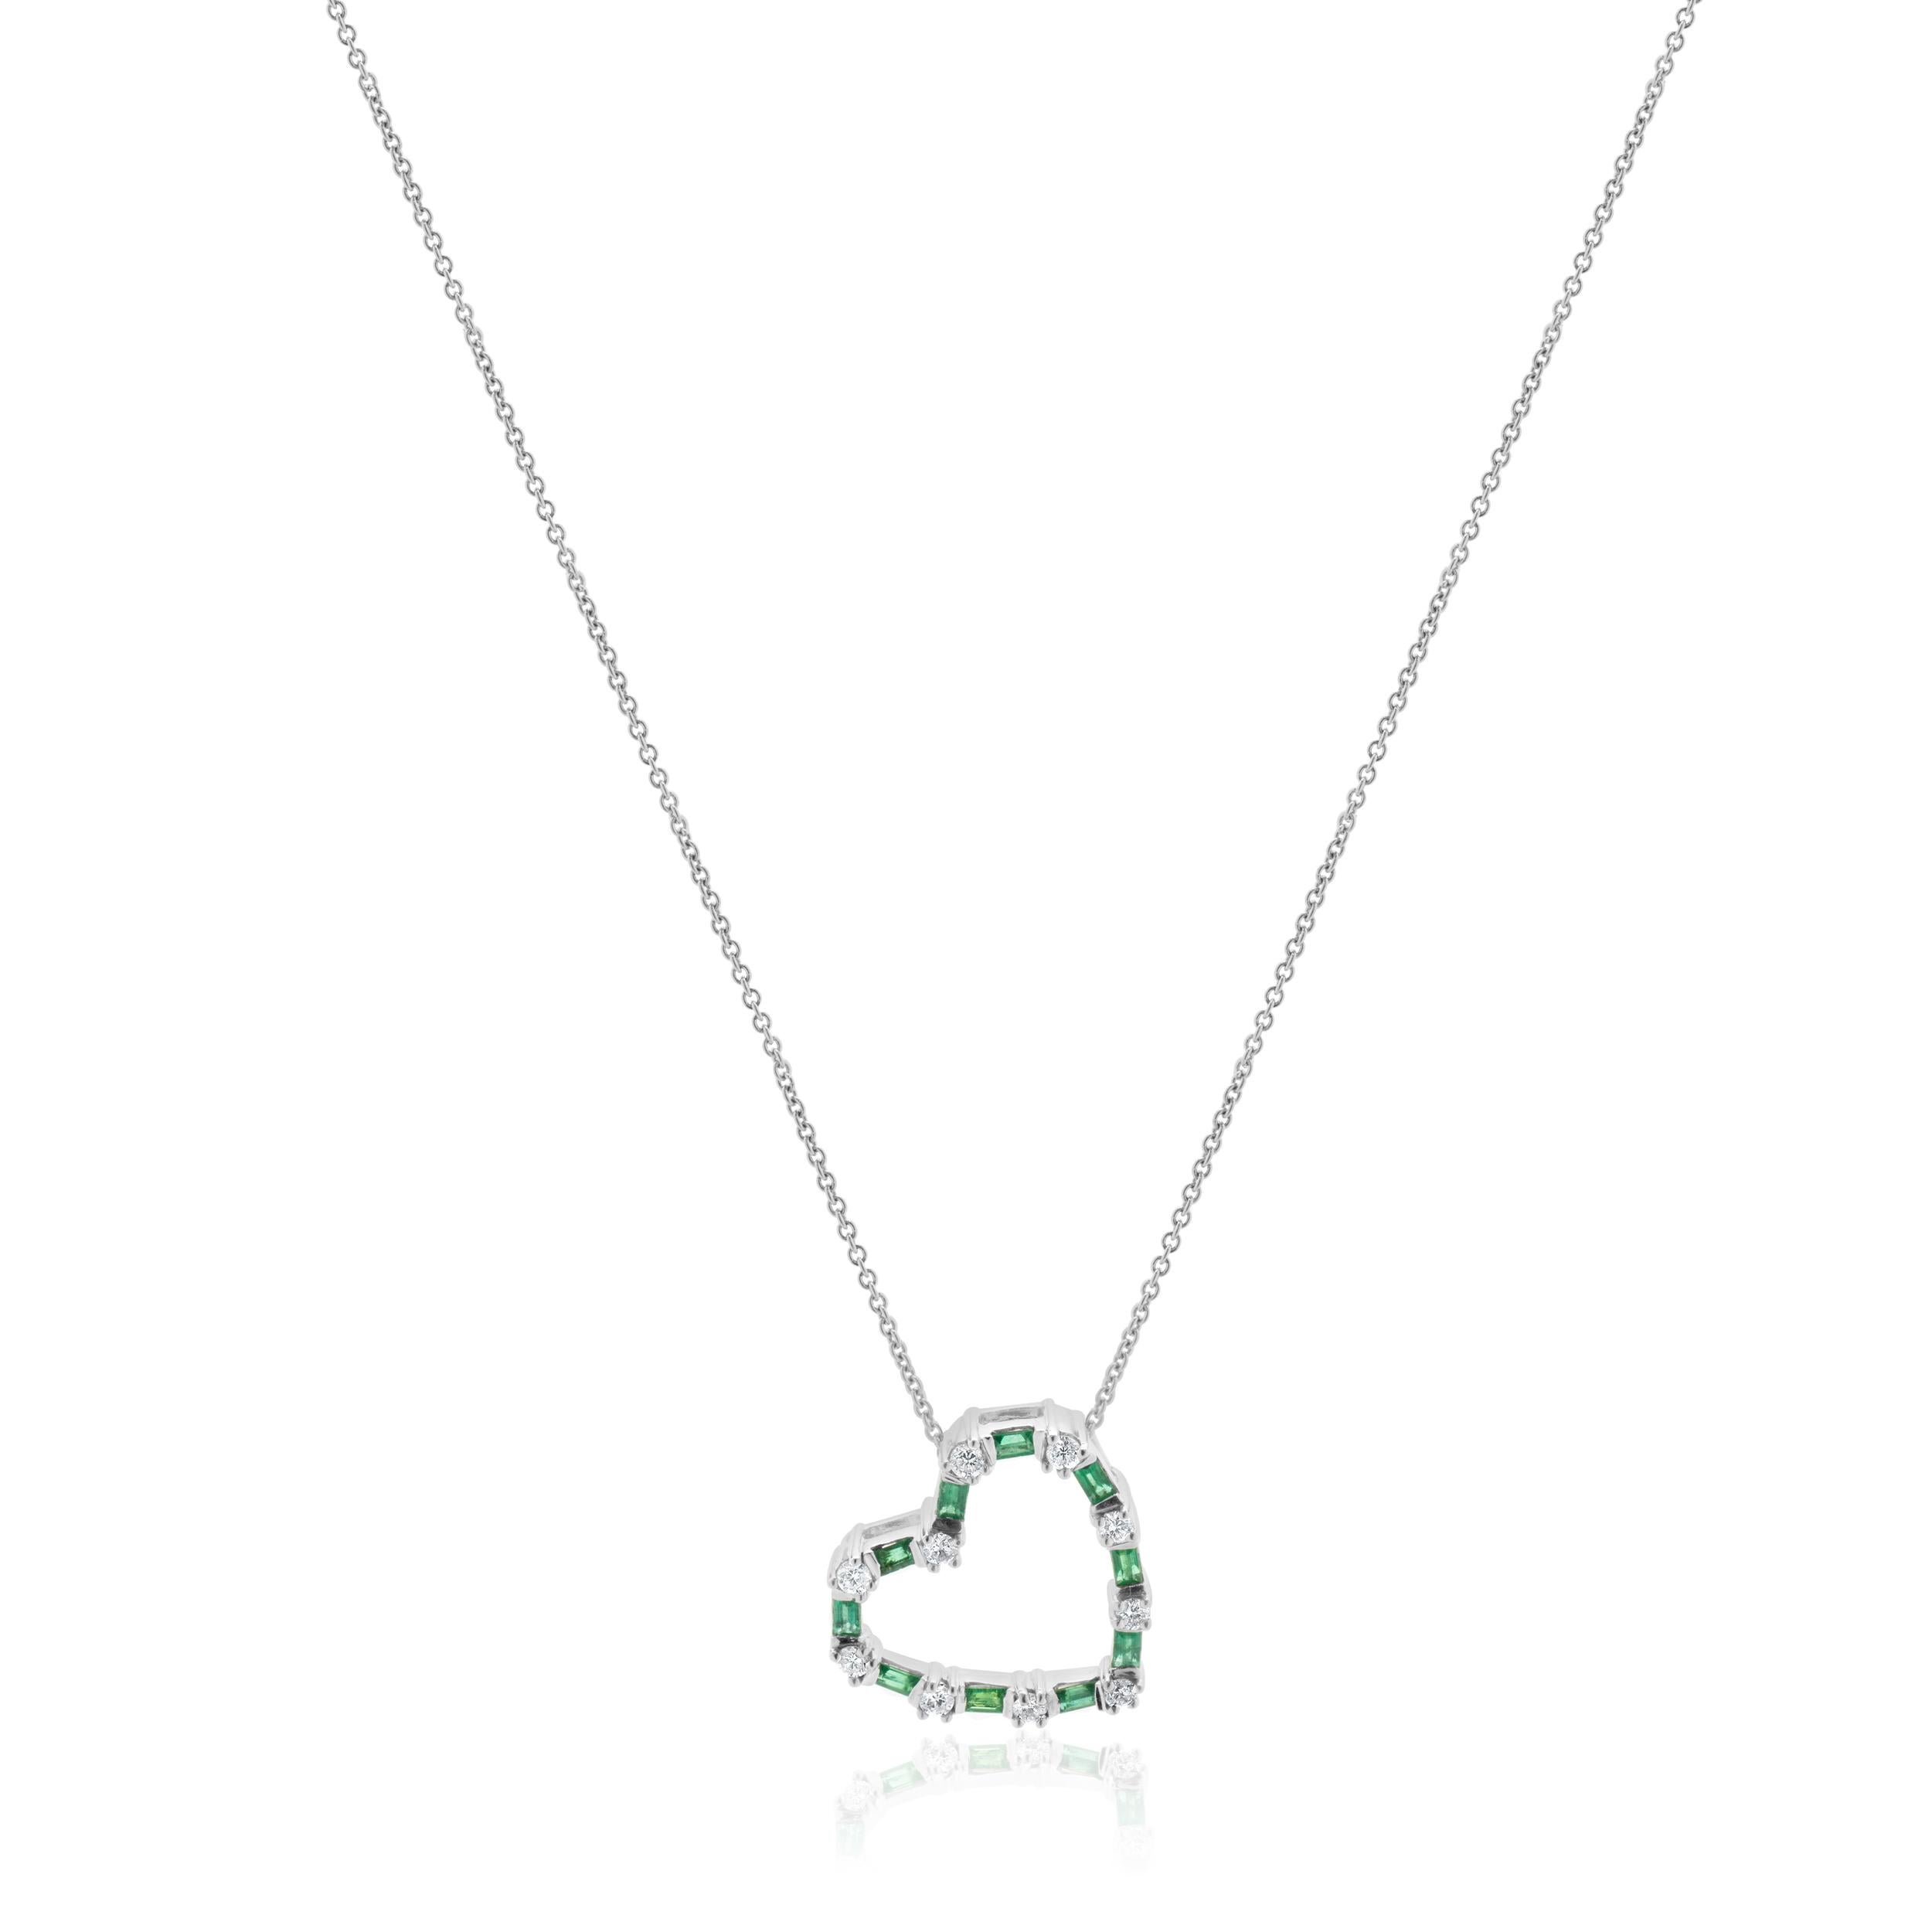 Designer: custom
Material: 18K white gold
Diamond: 10 round brilliant cut = 0.30cttw
Color: G
Clarity: VS2
Emerald: 10 baguette cut = 0.35cttw
Dimensions: necklace measures 16-inches in length
Weight: 5.12 grams
